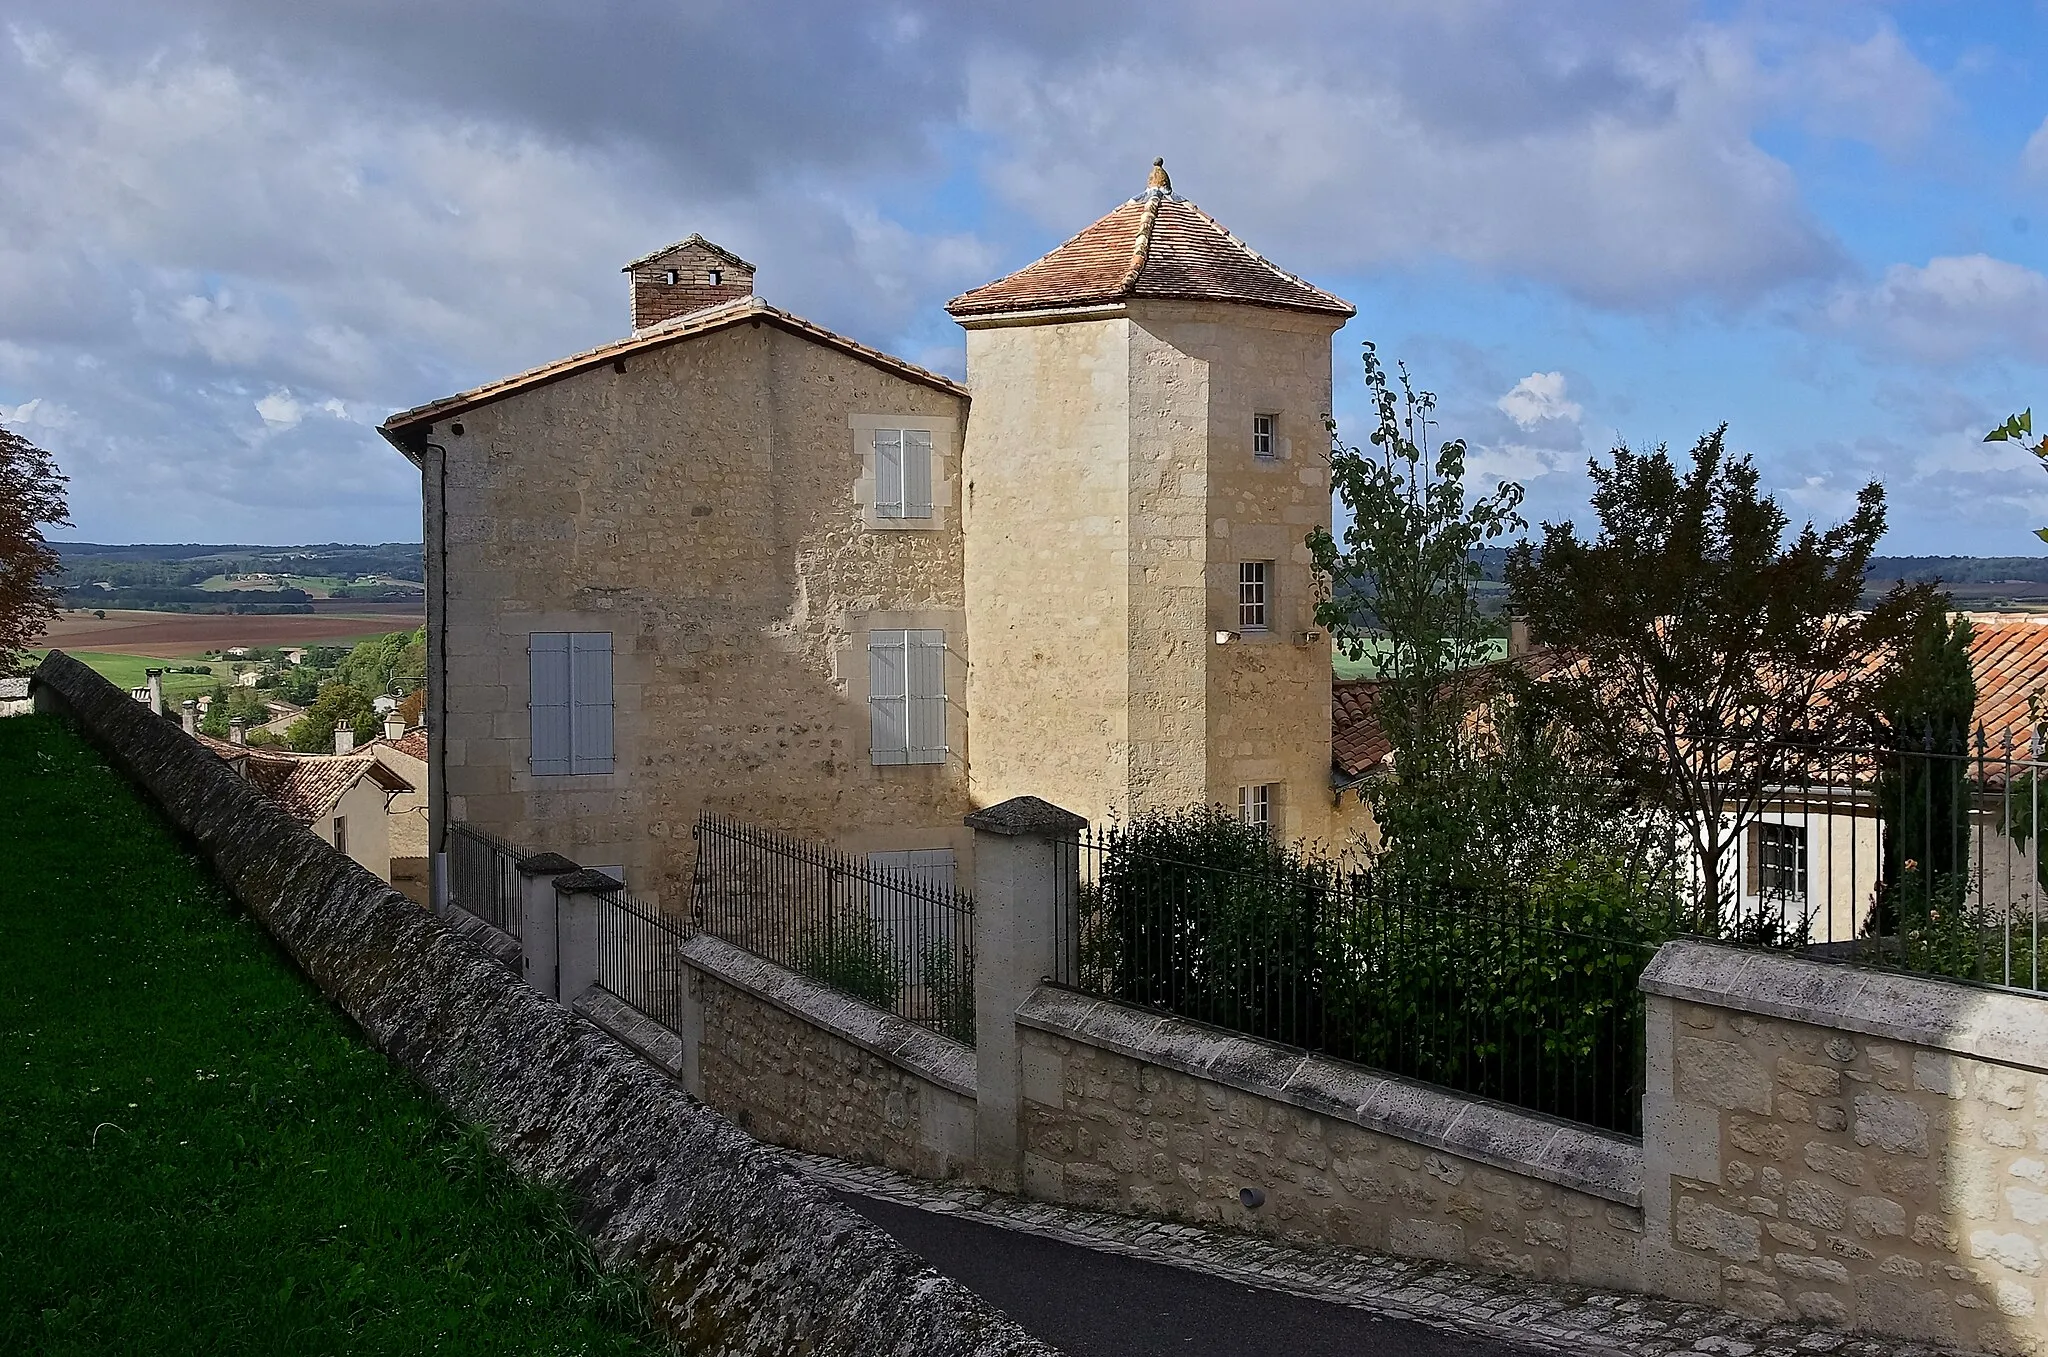 Photo showing: Former rectory, previously the seneschal's house (built 15th or 16th century), Villebois-Lavalette, Charente, France